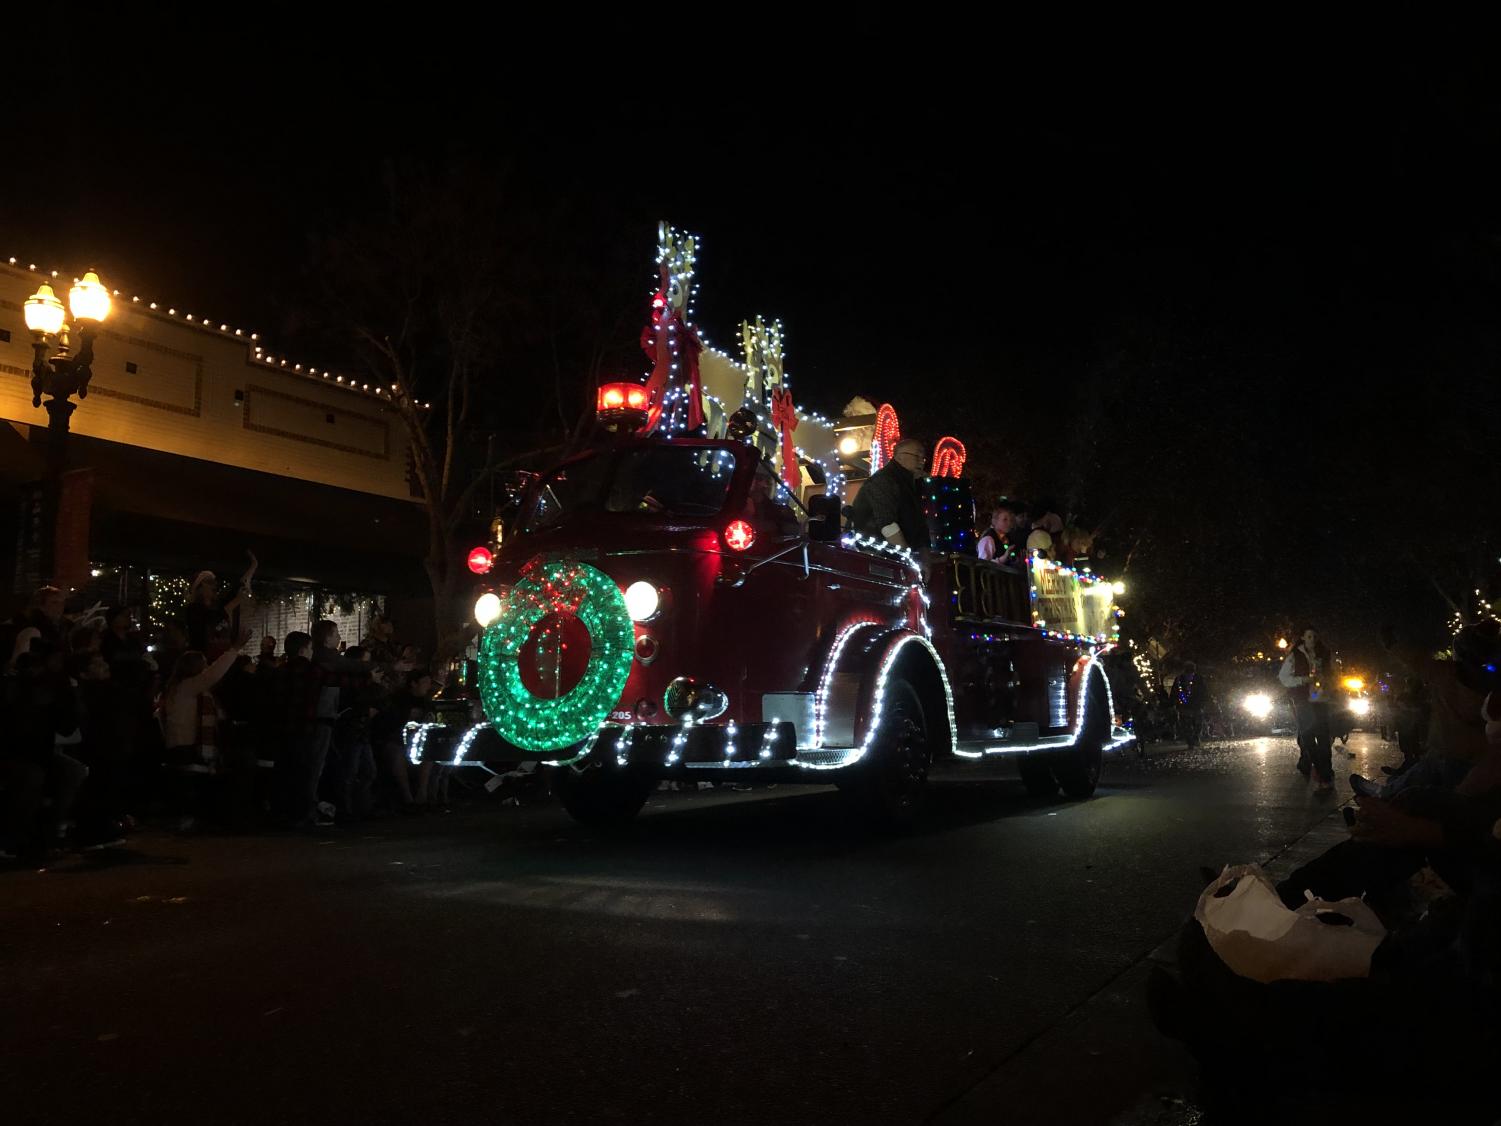 The Turlock Christmas Parade! The Roaring Times